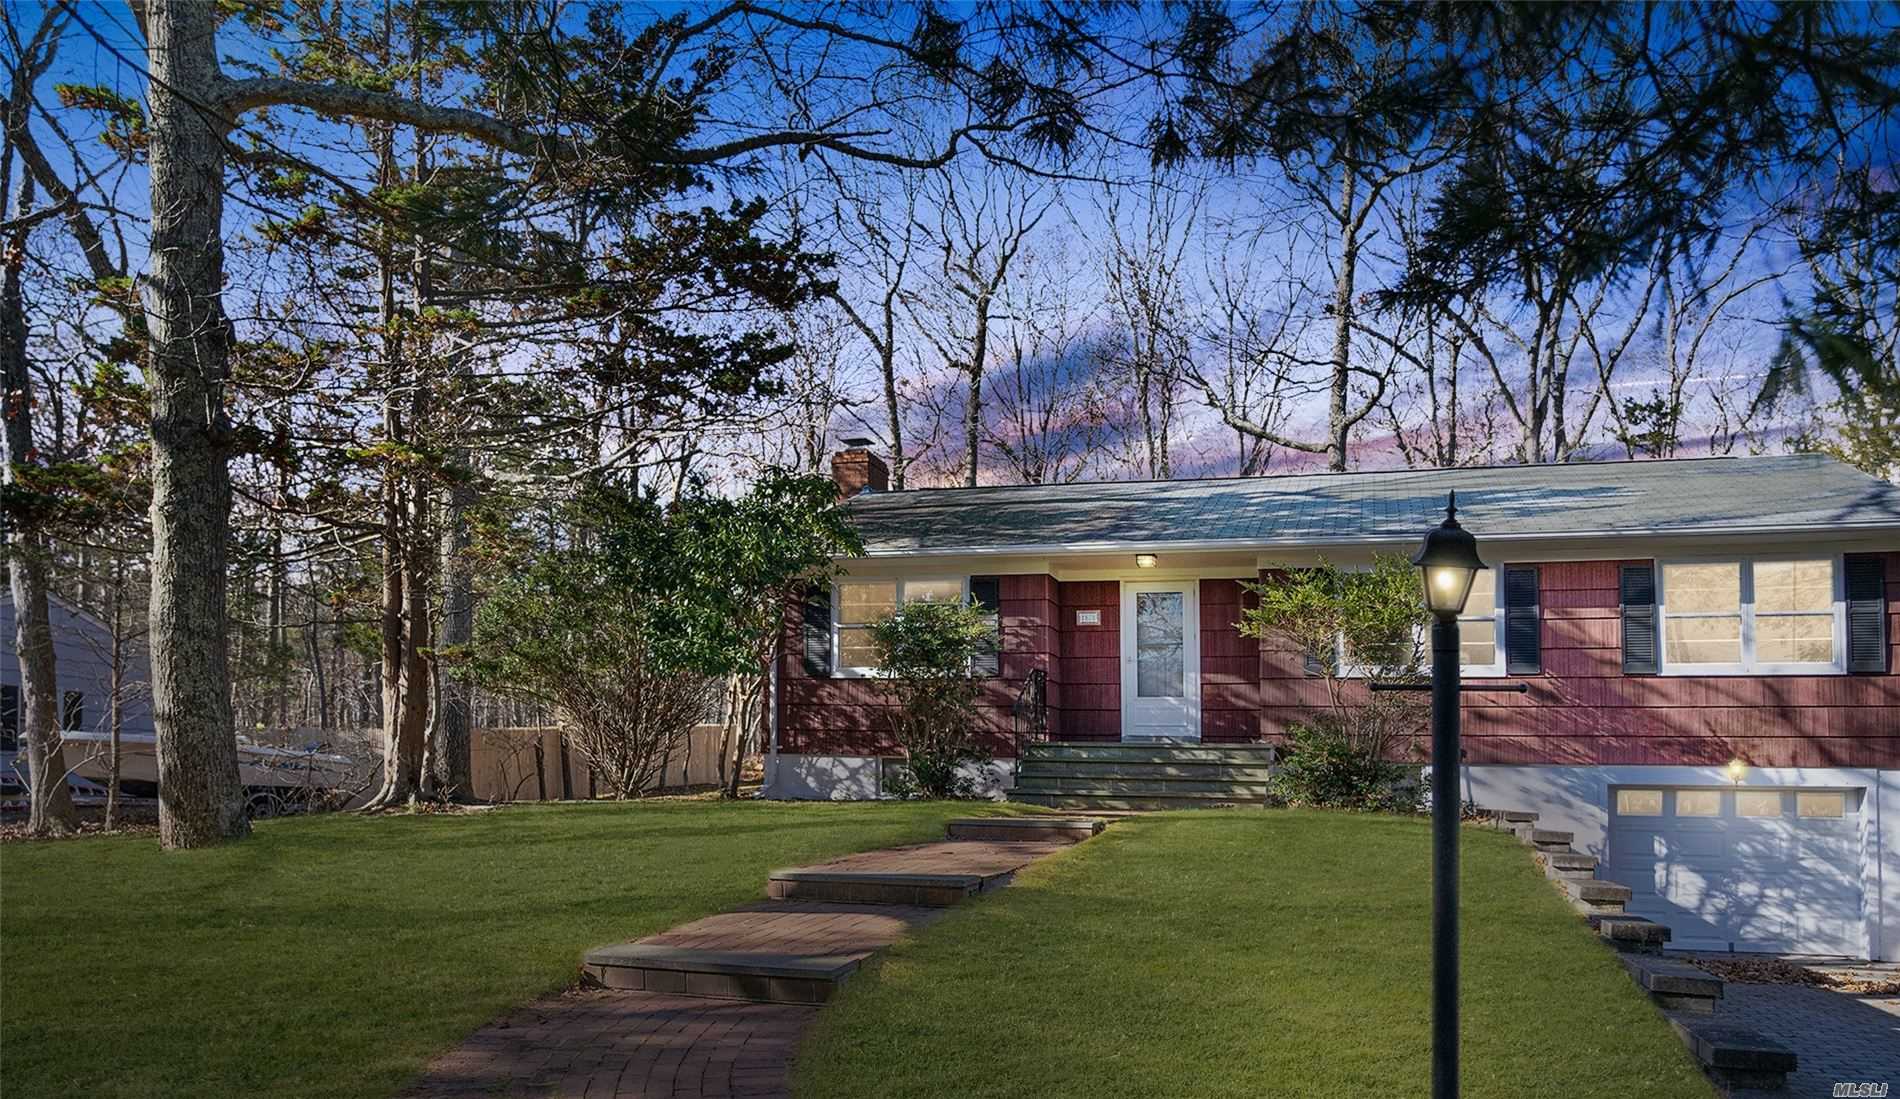 Behind the white pines, you would never expect a master bedroom suite with walk-in closet and full bathroom in this 3 Br, 2 bath ranch. Features refinished hardwood floors, wood burning fireplace, open dining room and a nice size deck in the backyard.